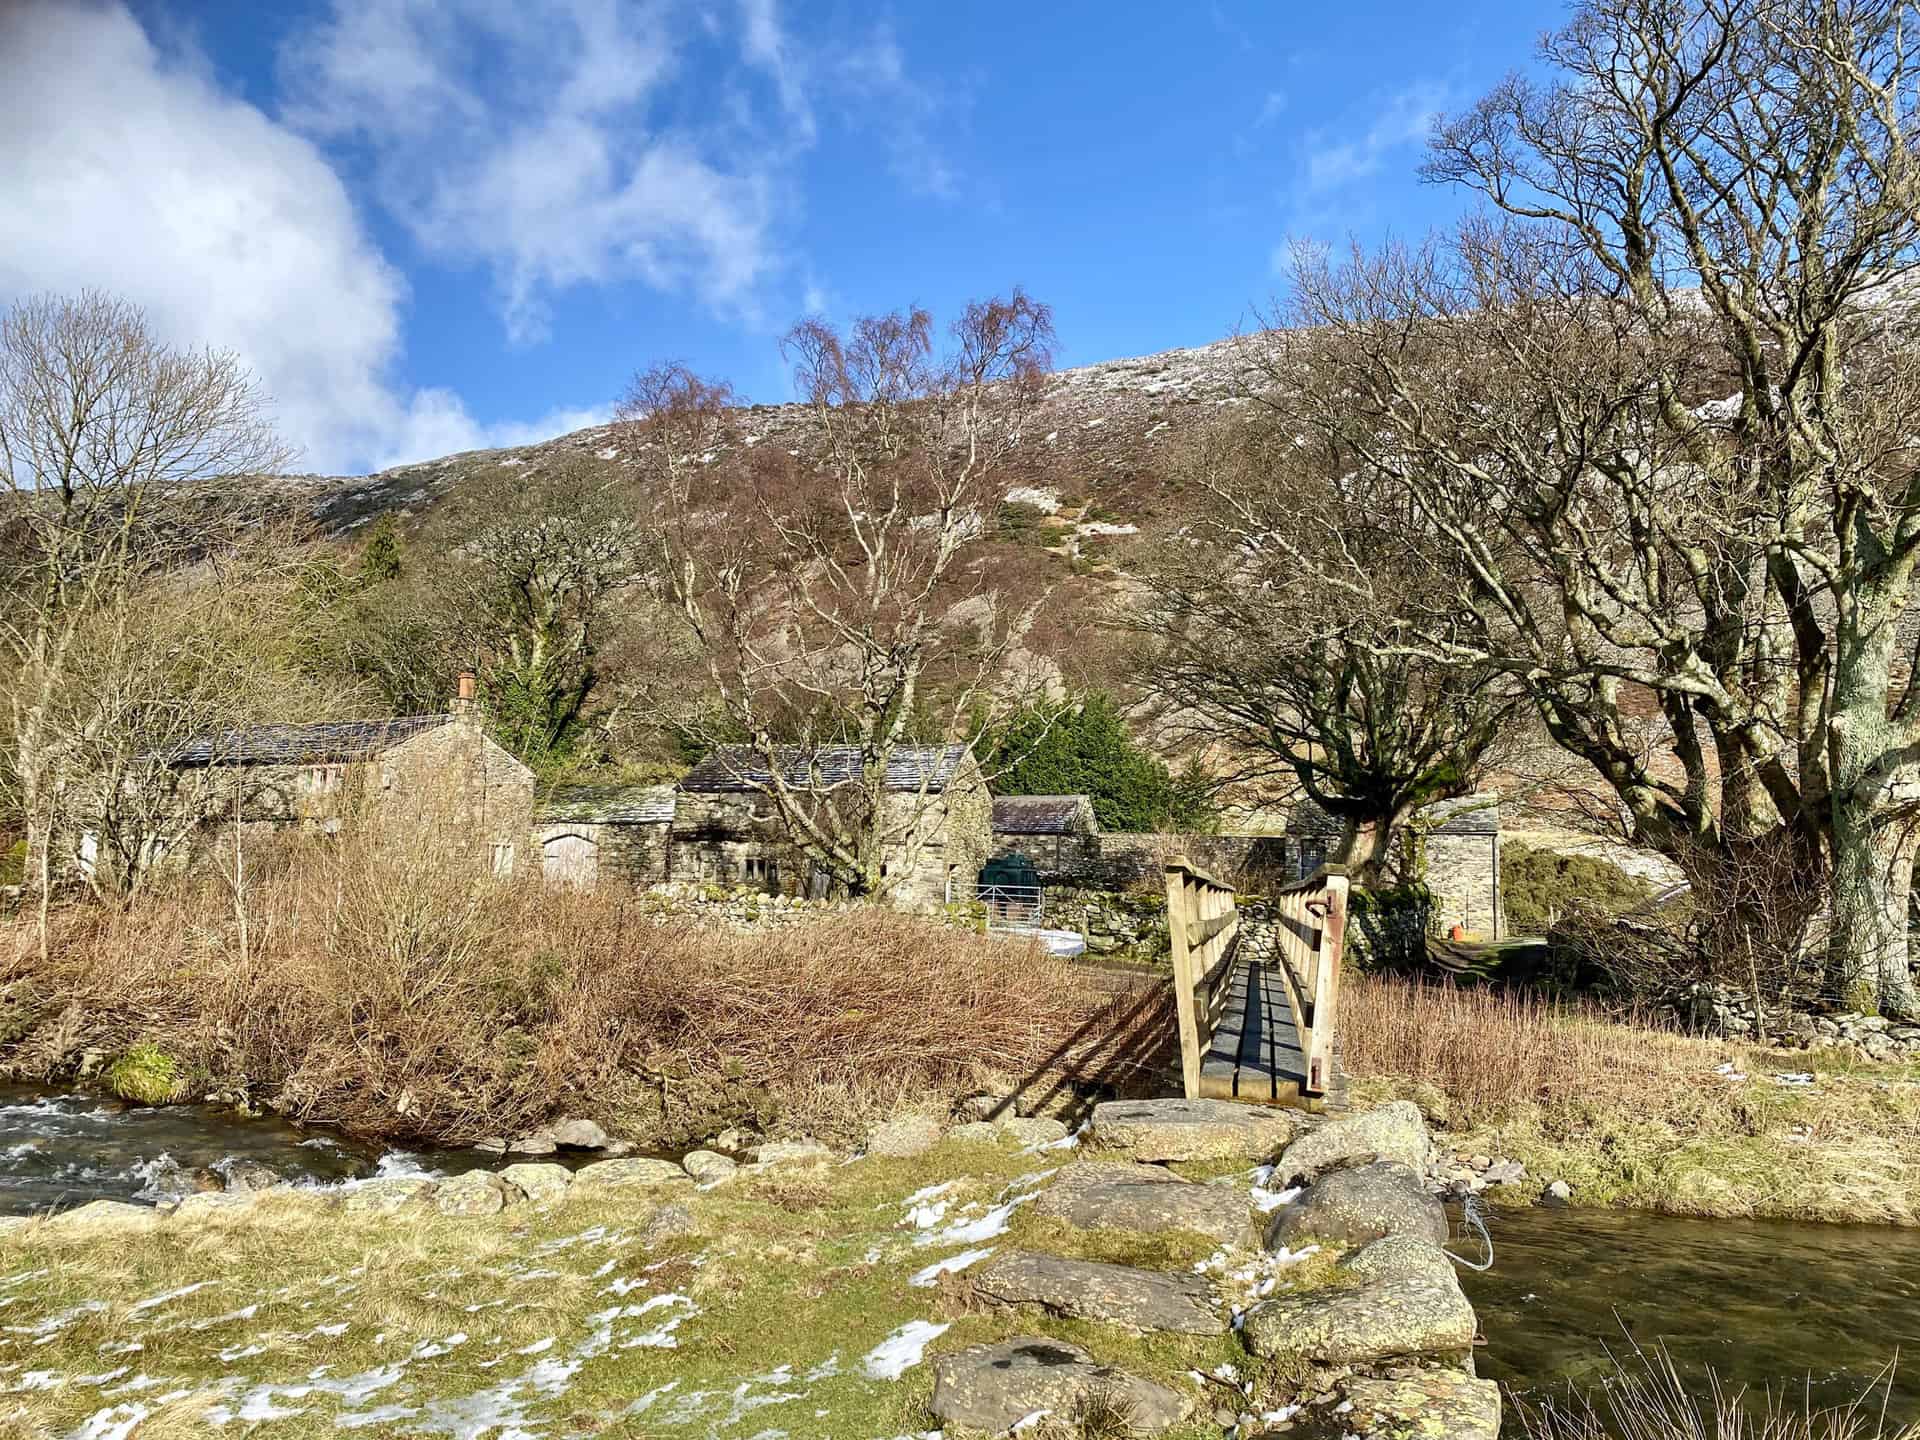 Picturesque farmhouses and farm buildings surrounded by trees at Roundhouse, about one-quarter of the way round this Bowscale Tarn walk.